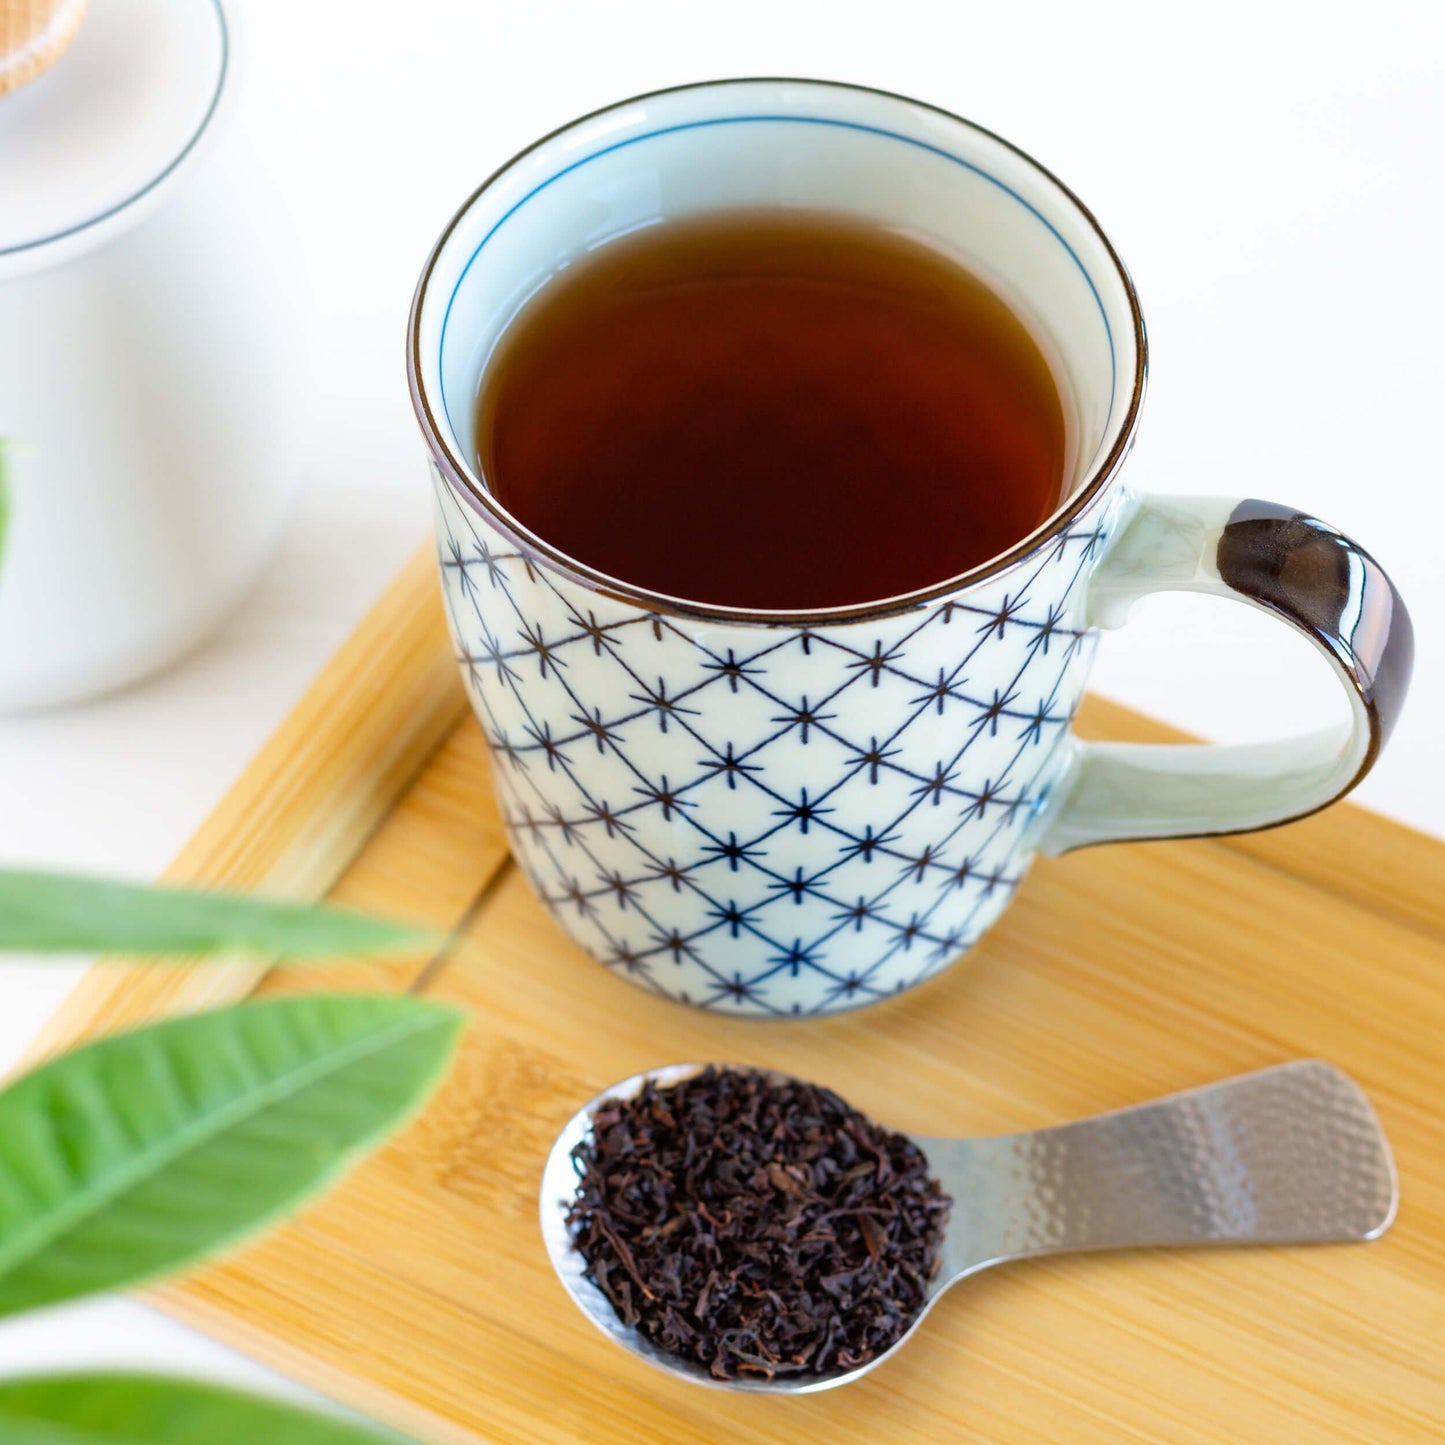 Organic Ceylon Black Tea shown brewed in a mug and with loose leaves in a scoop